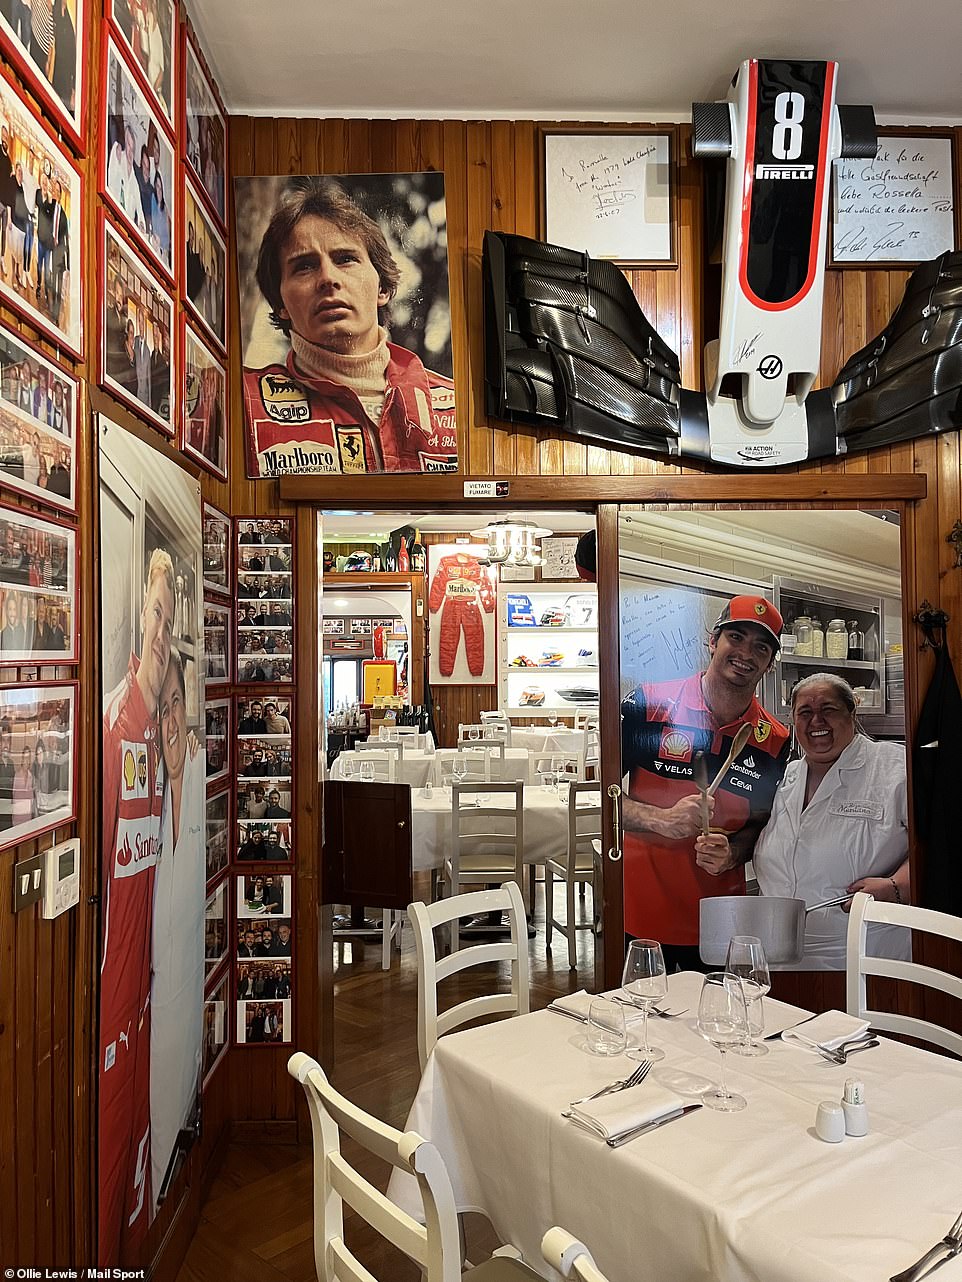 But Ferrari holds the deepest affection in Rossella's heart.  The walls of the restaurant are covered with memories.